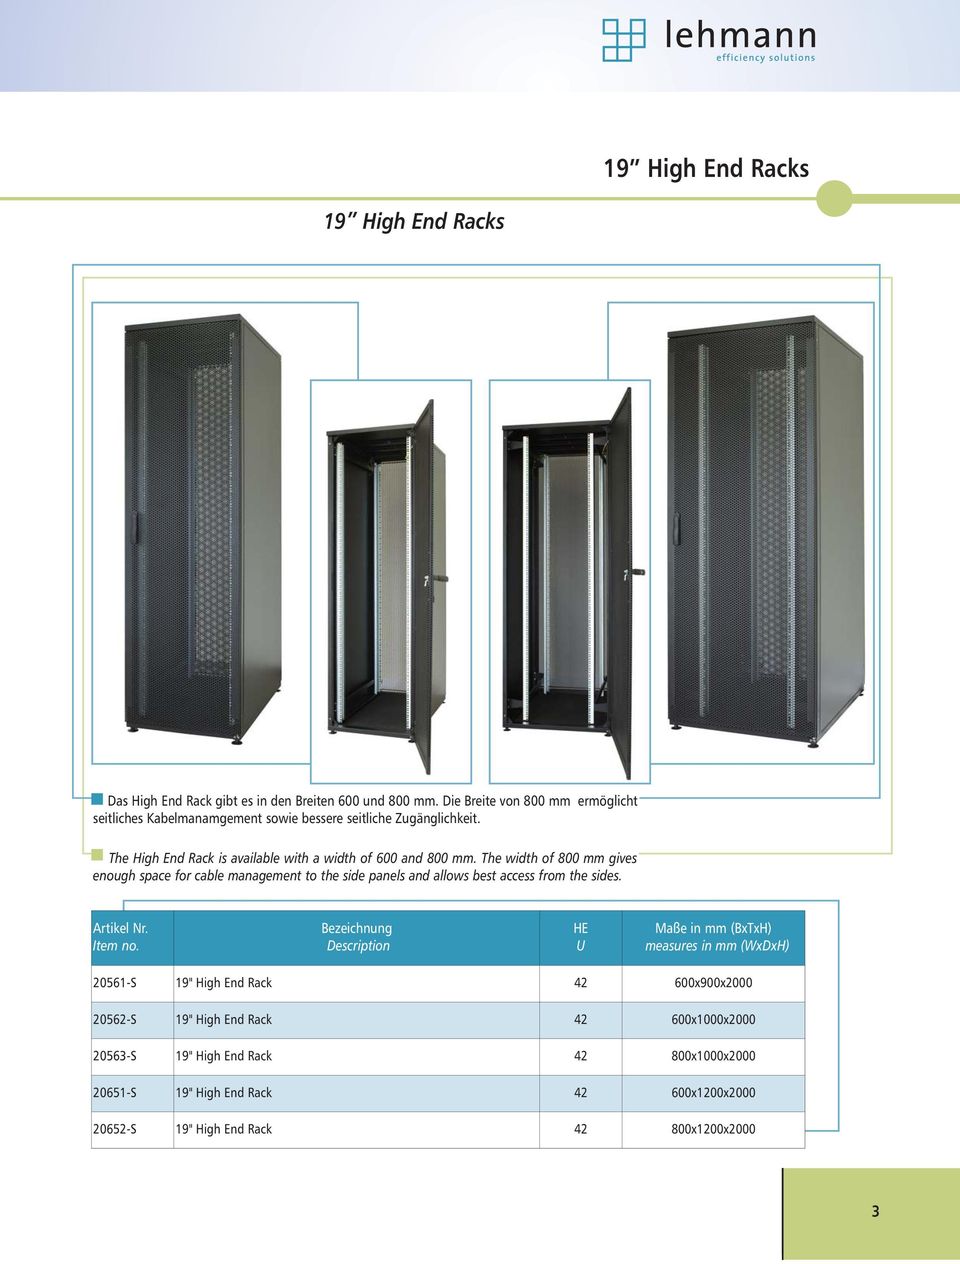 The High End Rack is available with a width of 600 and 800 mm.